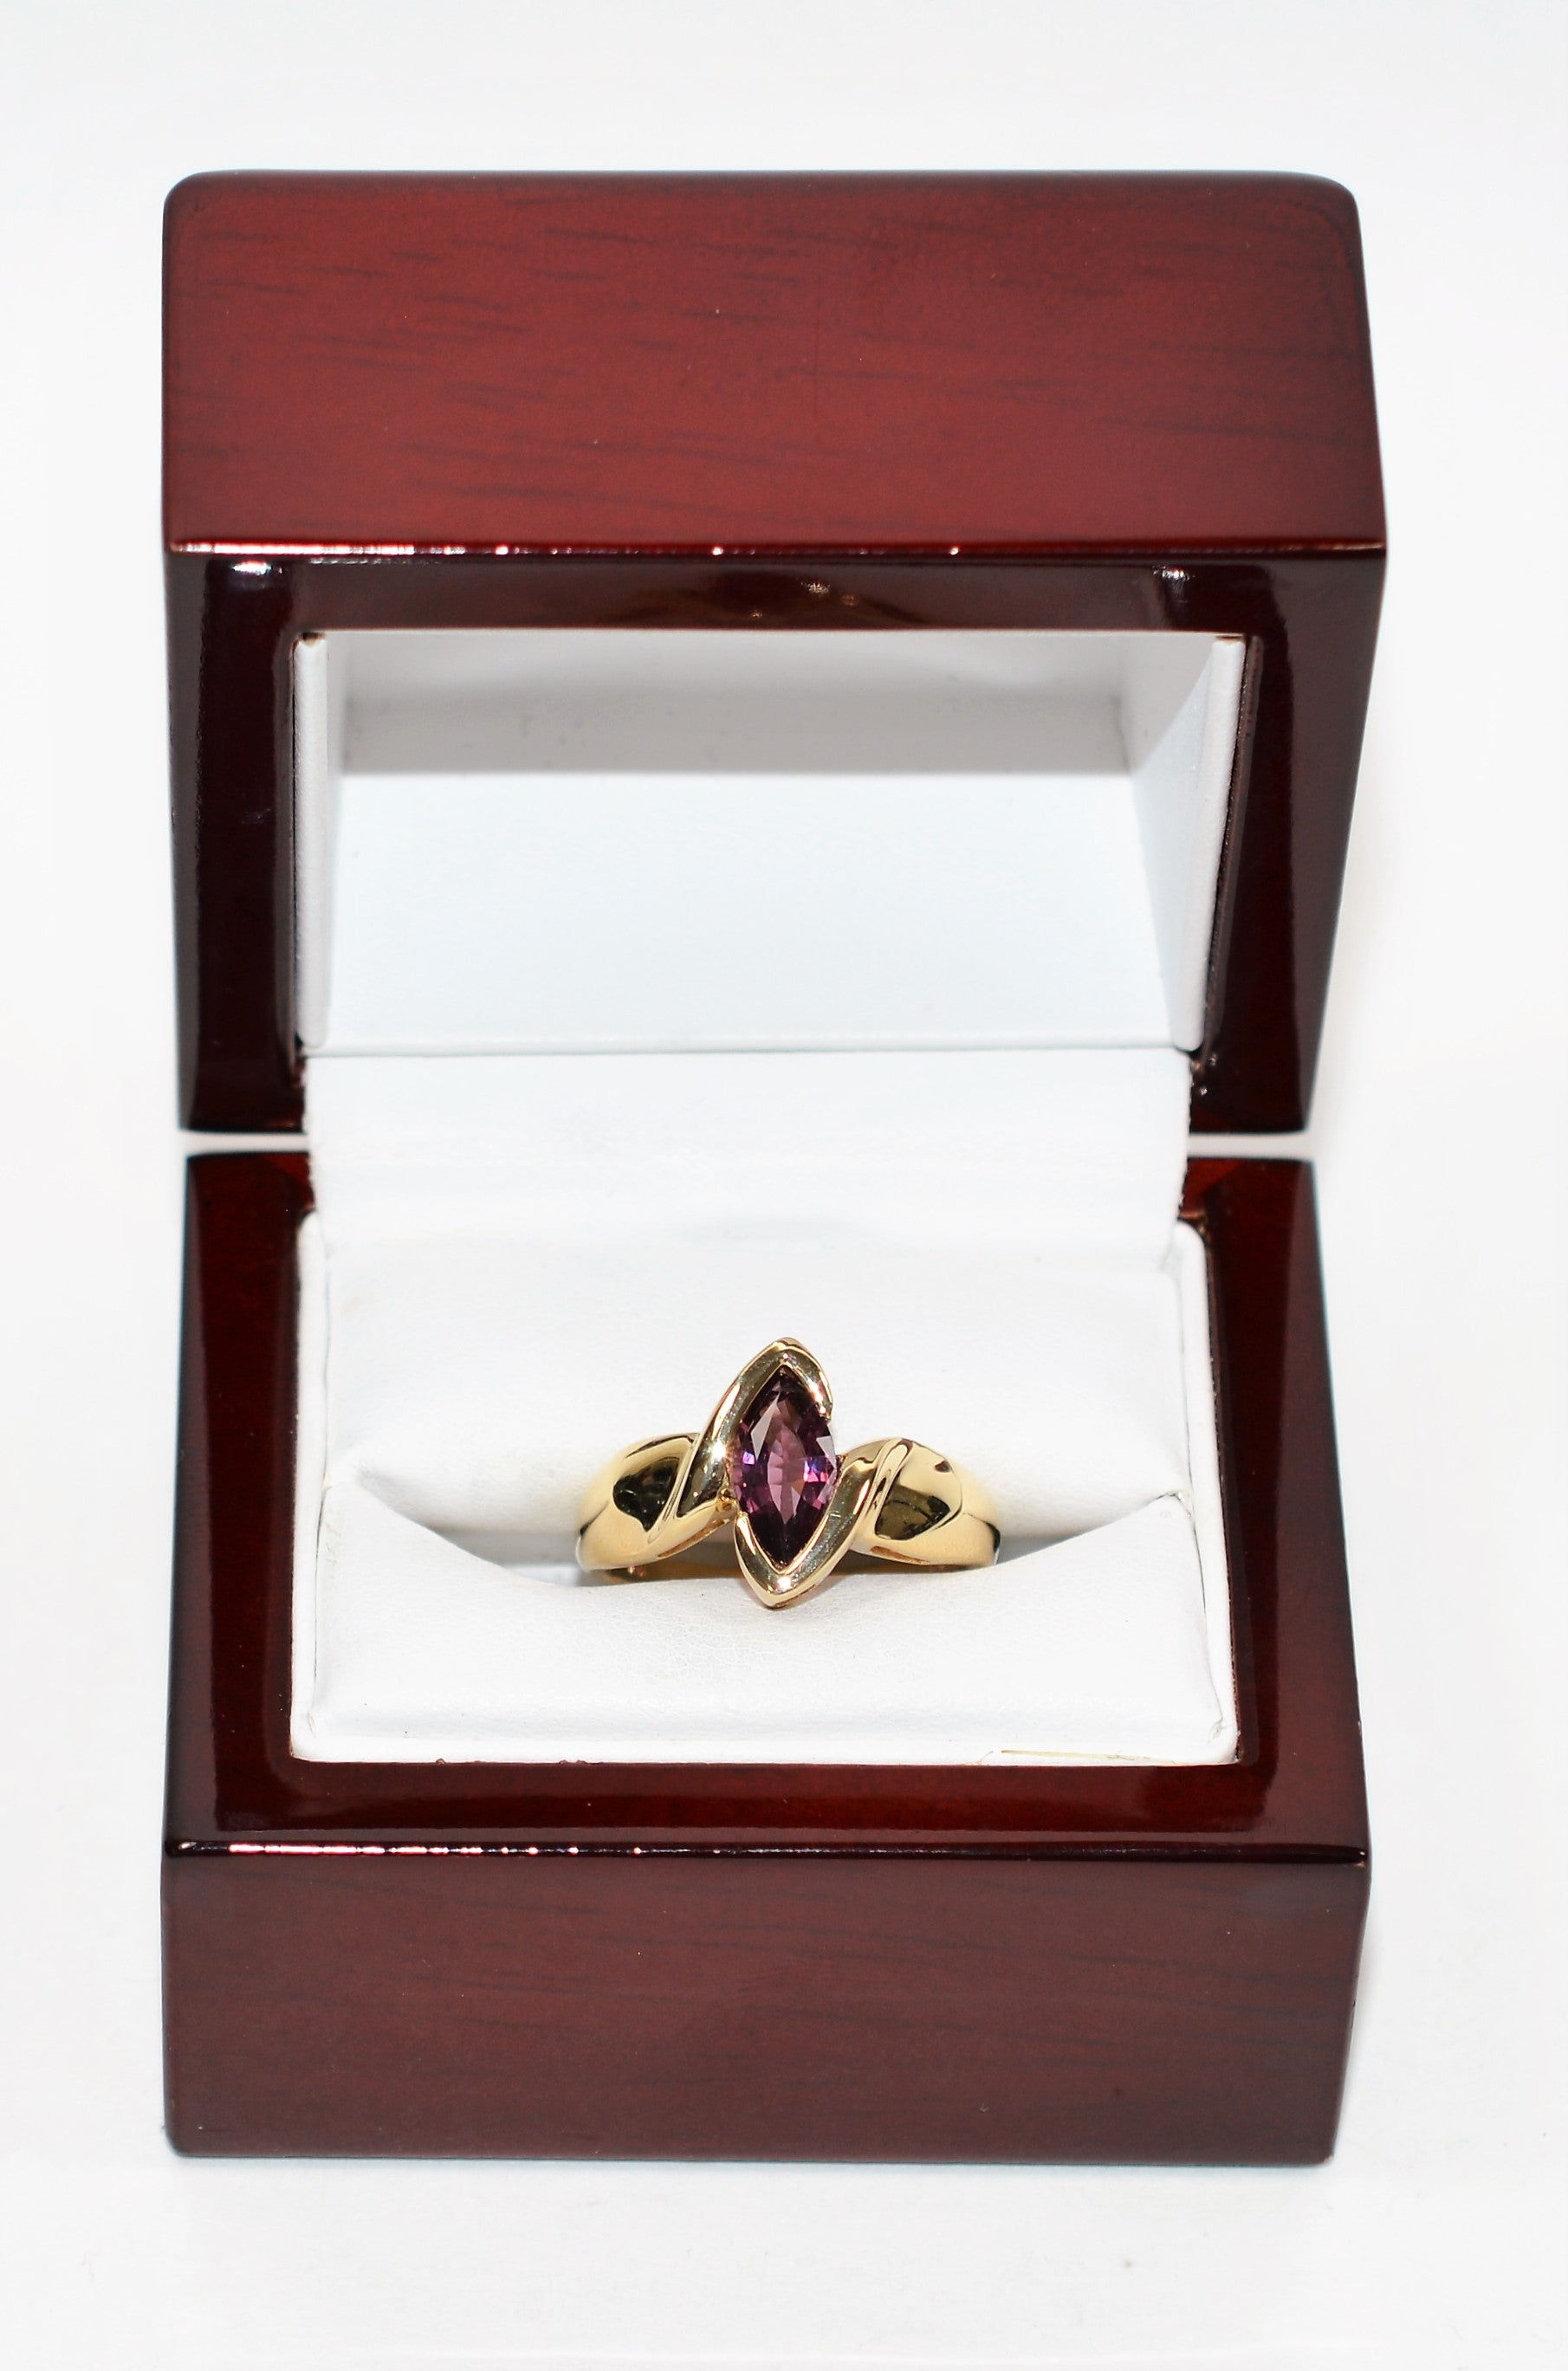 Natural Spinel Ring 10K Solid Gold 1.30ct Purple Ring Vintage Ring Marquise Ring June Birthstone Ring Solitaire Ring Womens Estate Jewellery